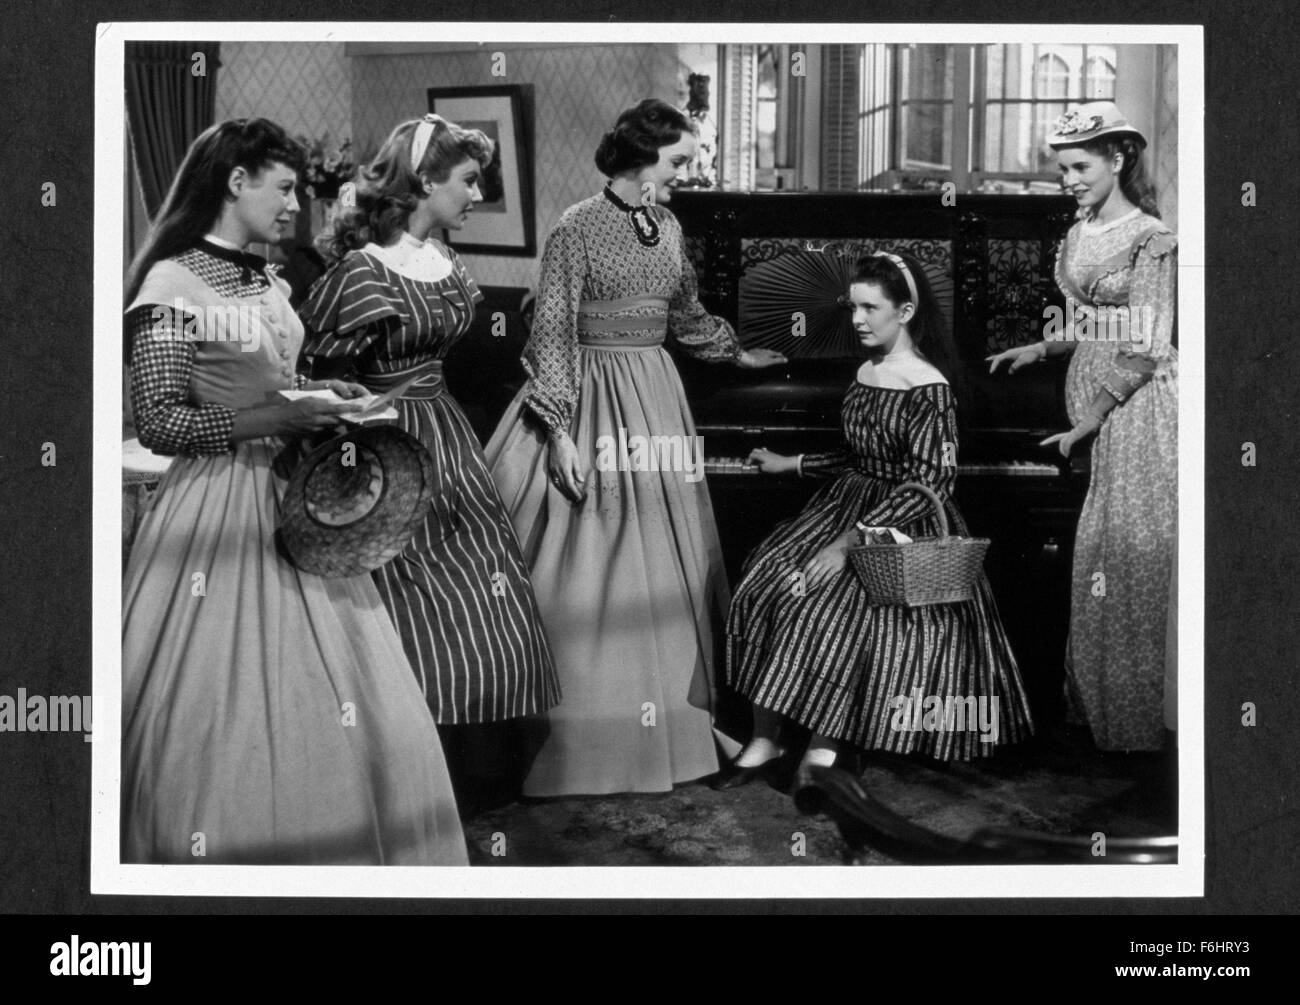 1949, Film Title: LITTLE WOMEN, Director: MERVYN LeROY, Studio: MGM, Pictured: JUNE ALLYSON, MARY ASTOR, JANET LEIGH, MERVYN LeROY, MARGARET O'BRIEN, ELIZABETH TAYLOR, PERIOD COSTUME, ACCOMPLISHED, PIANO. (Credit Image: SNAP) Stock Photo